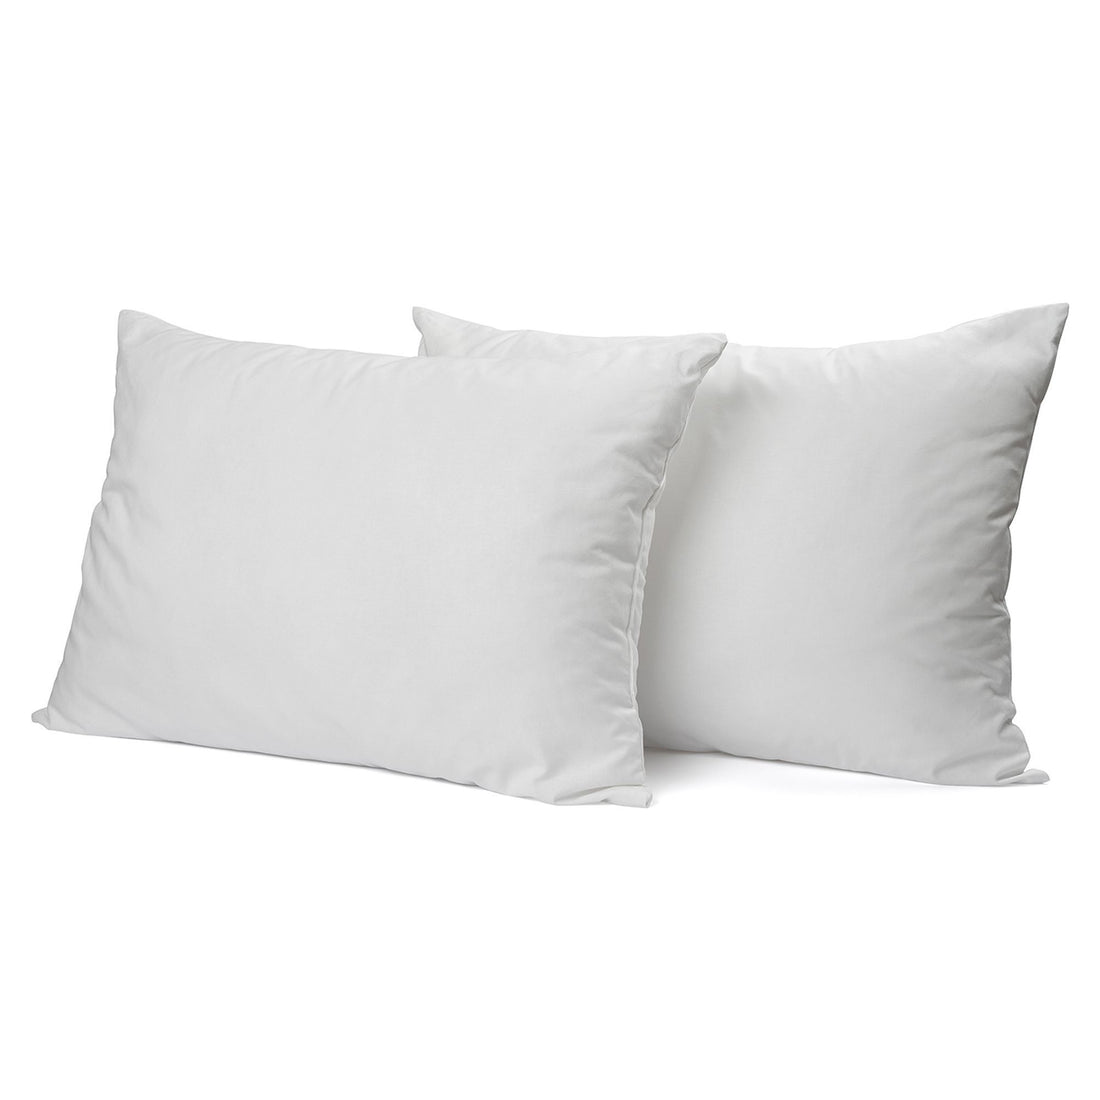 Royal Comfort Goose Down Feather Pillows 1000GSM 100% Cotton Cover - Twin Pack-Bedding-PEROZ Accessories